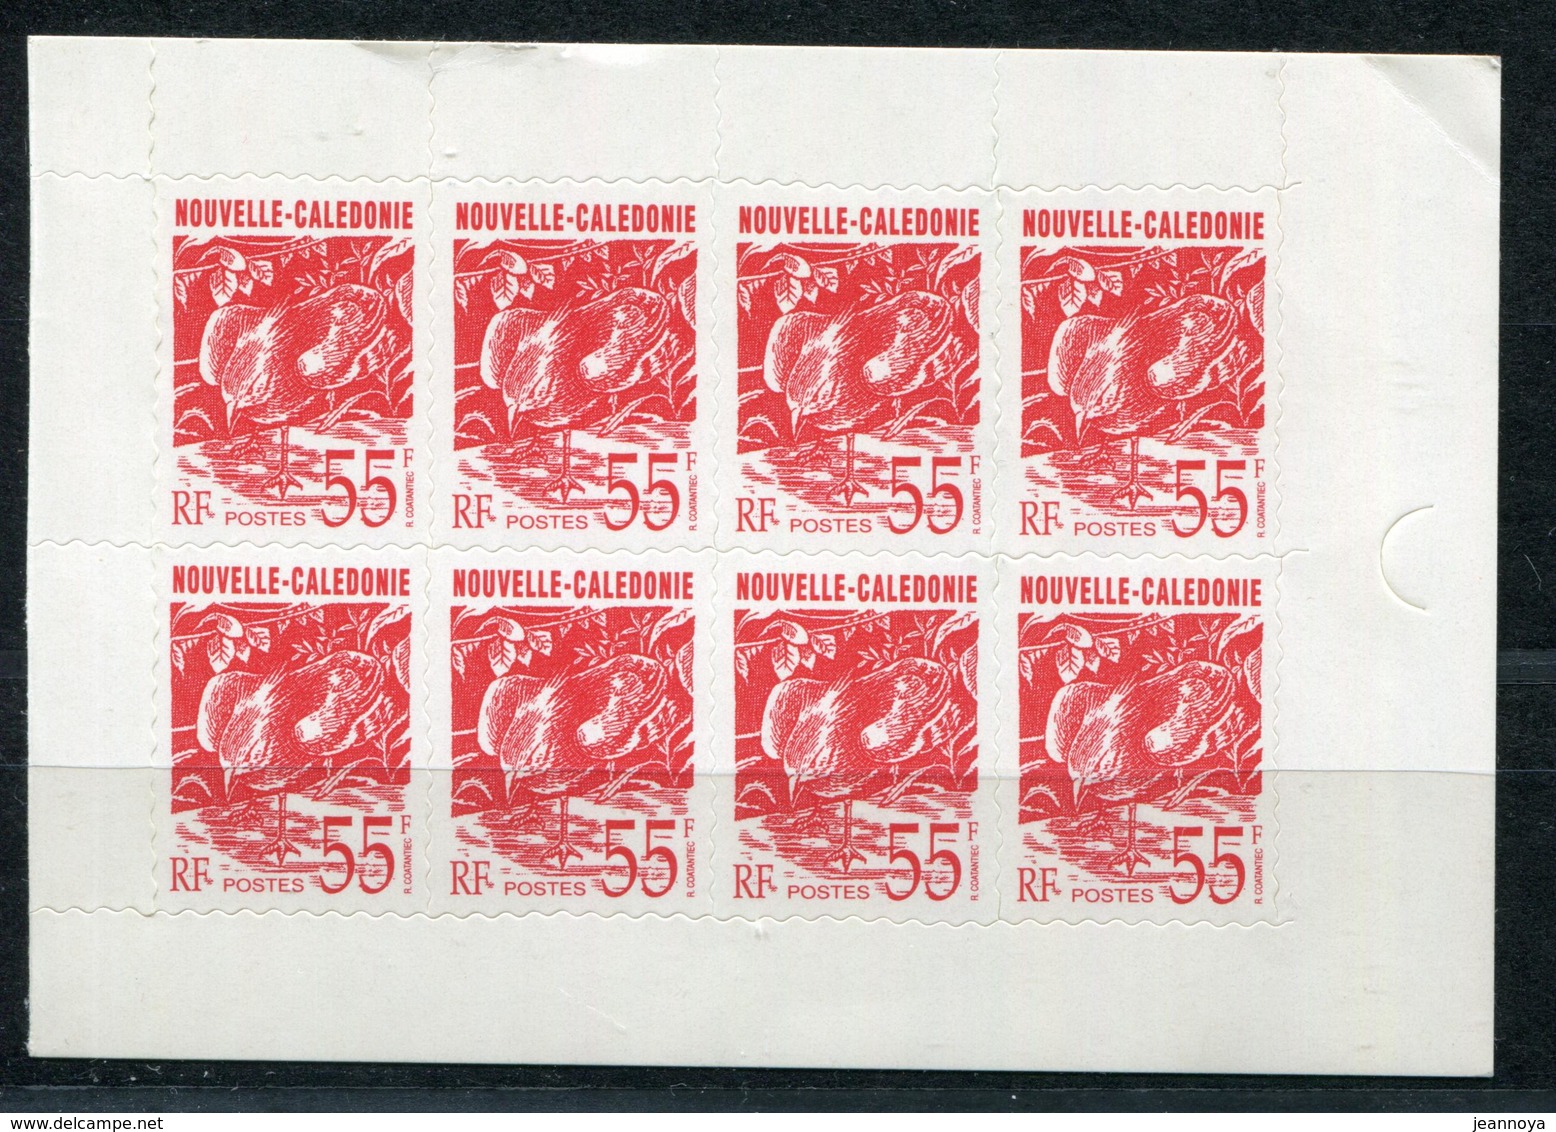 NOUVELLE CALEDONIE - 1/2 CARNET N° C639 - * * - LUXE - Cuadernillos